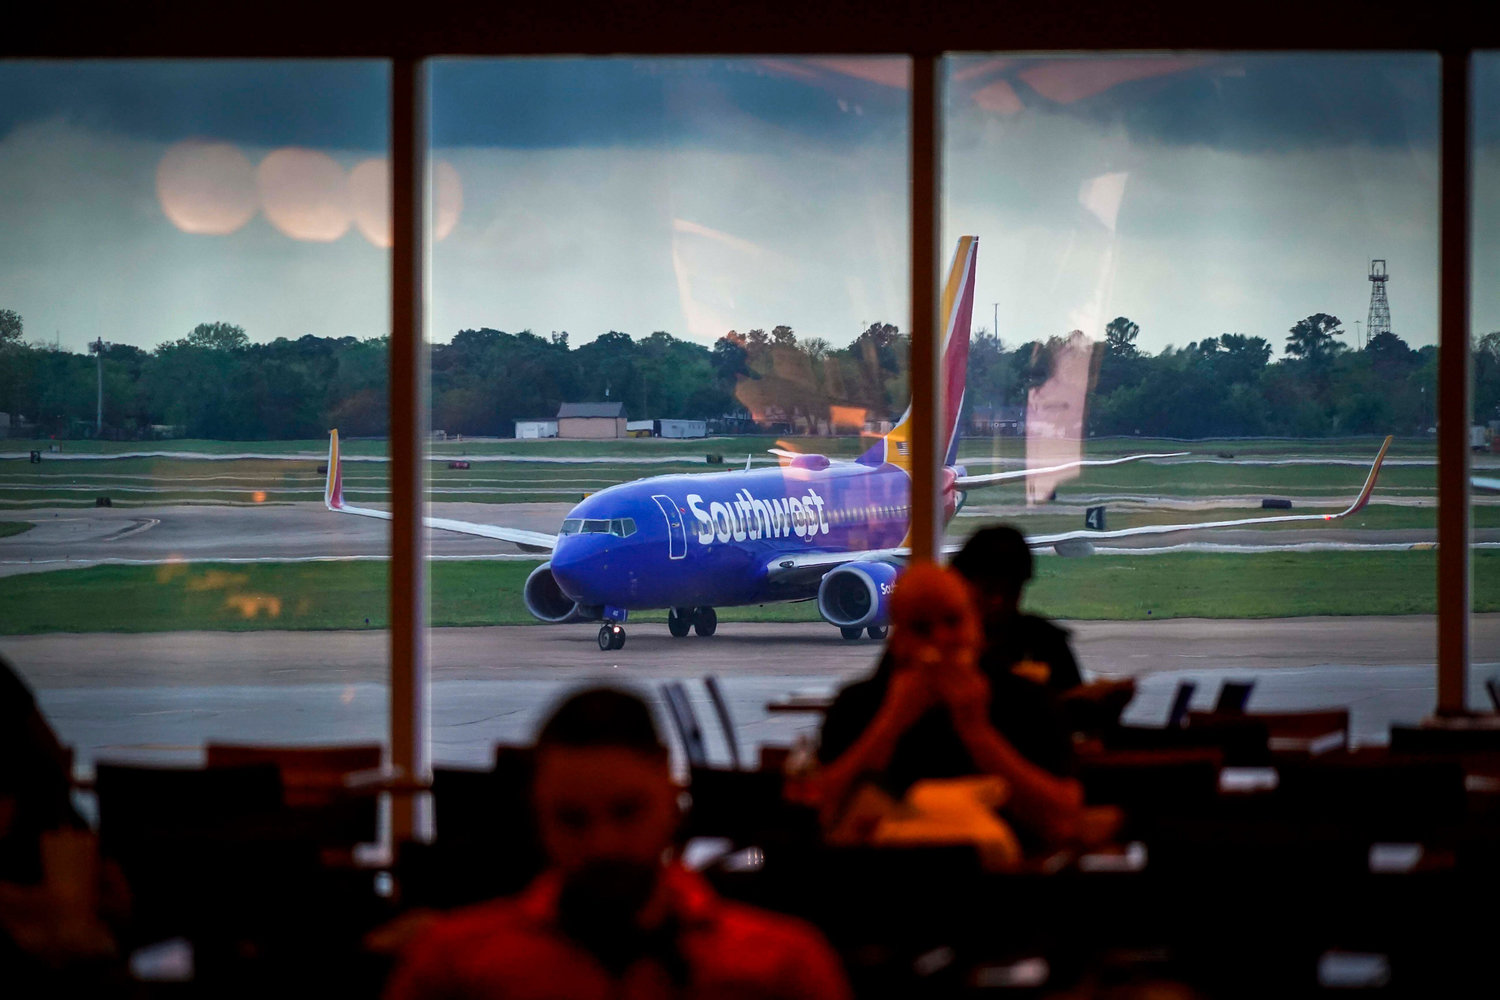 southwest airlines cancellation policy for weather